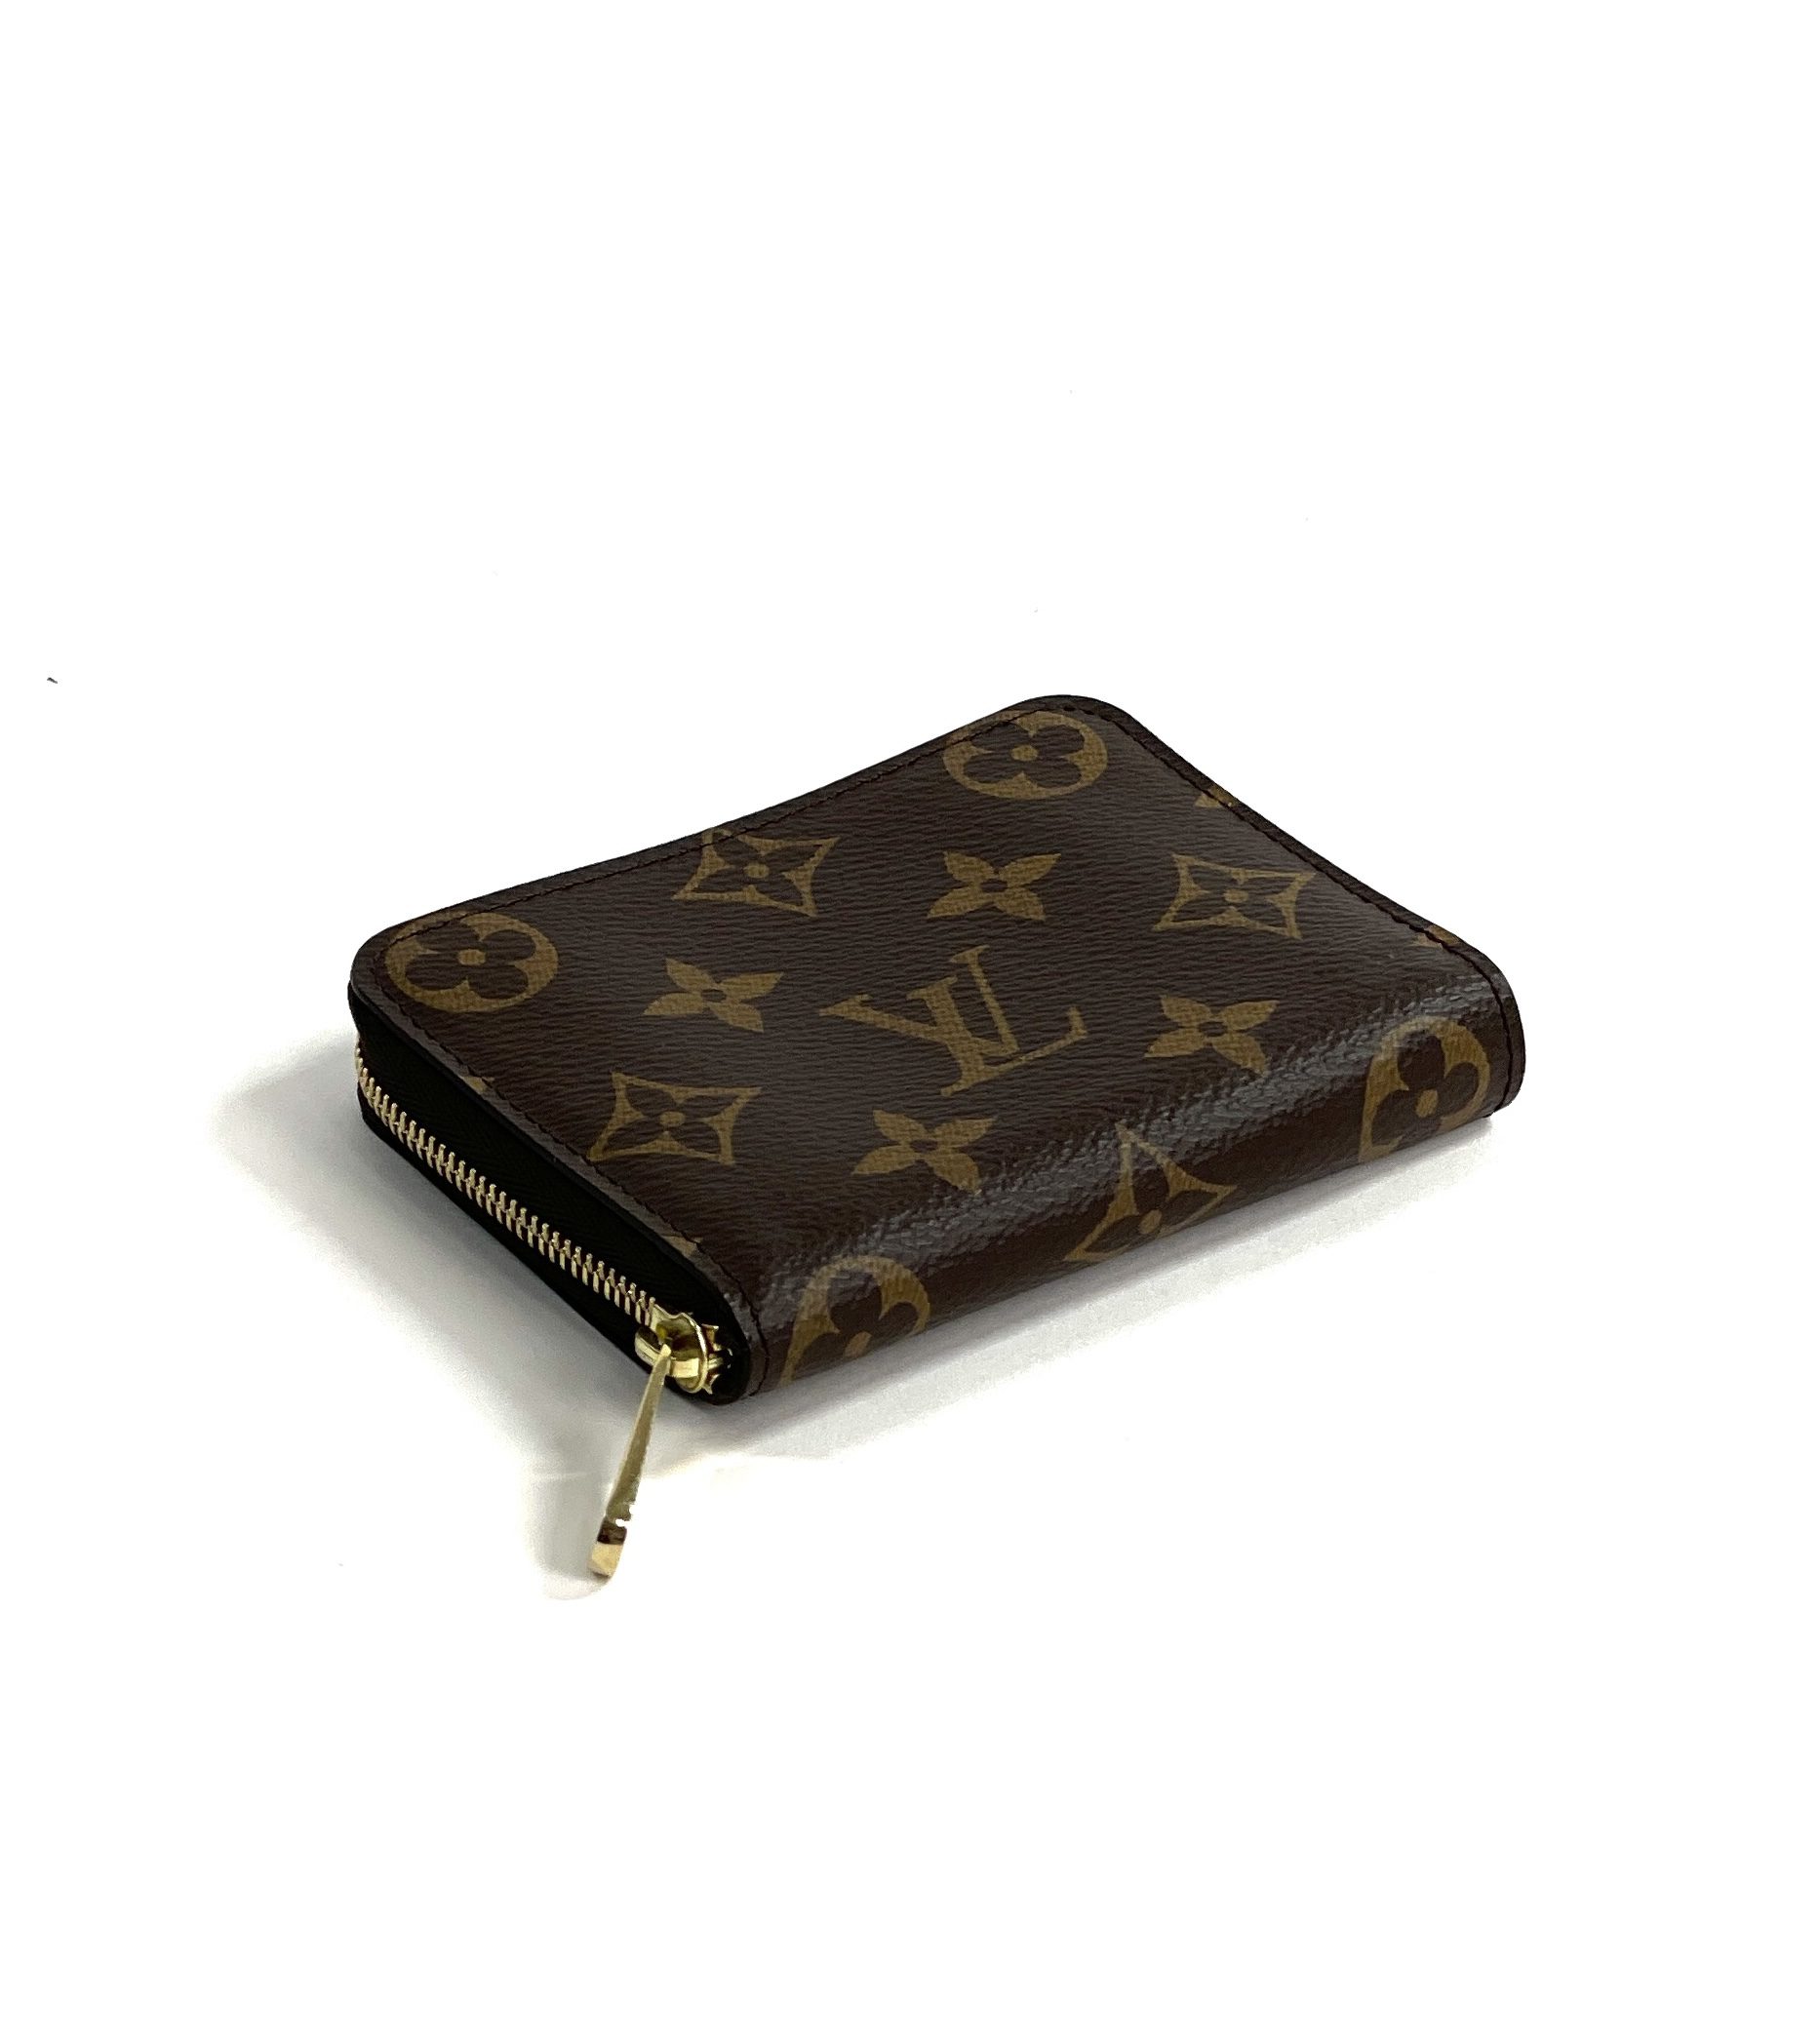 Zippy Coin Purse Epi Leather - Women - Small Leather Goods